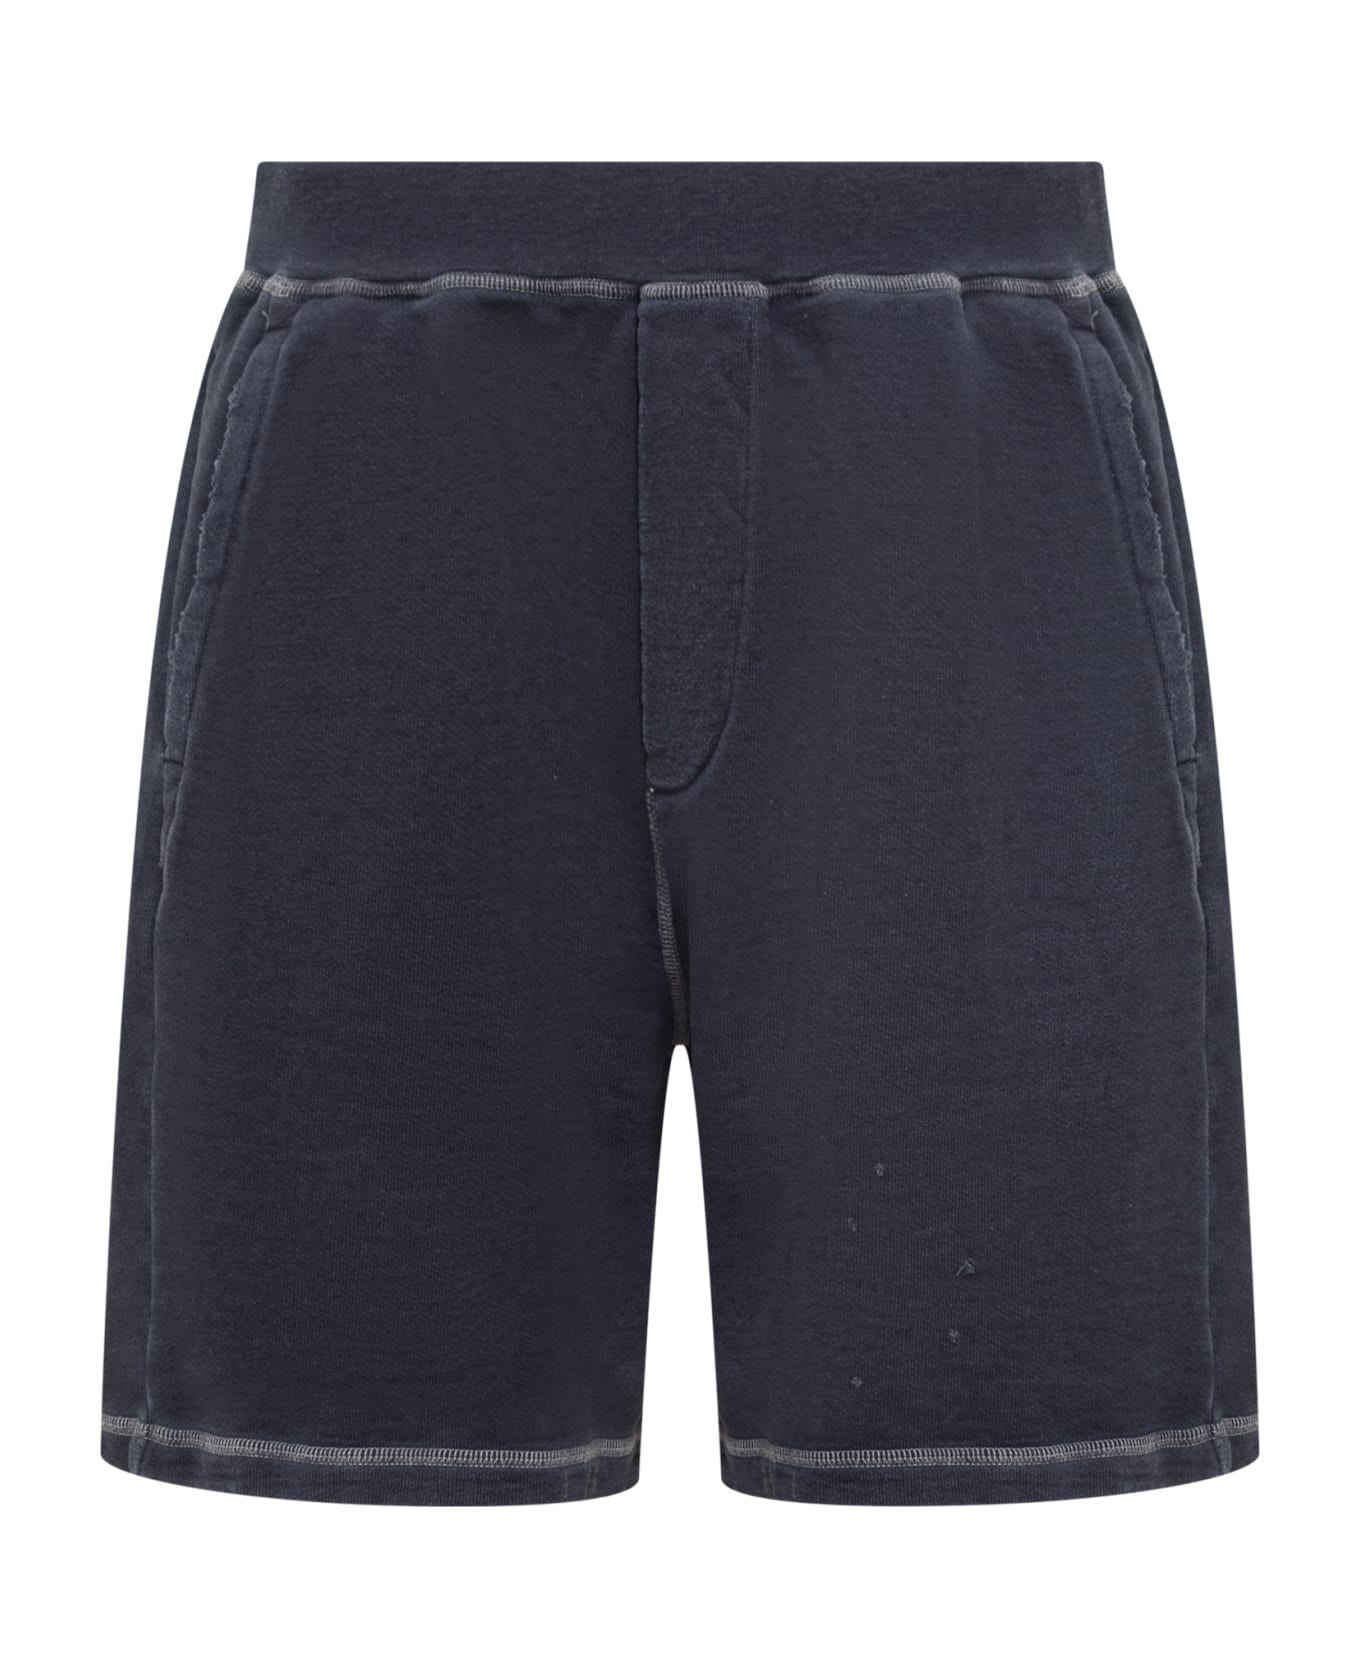 Dsquared2 Ruined Shorts - NAVY BLUE ショートパンツ